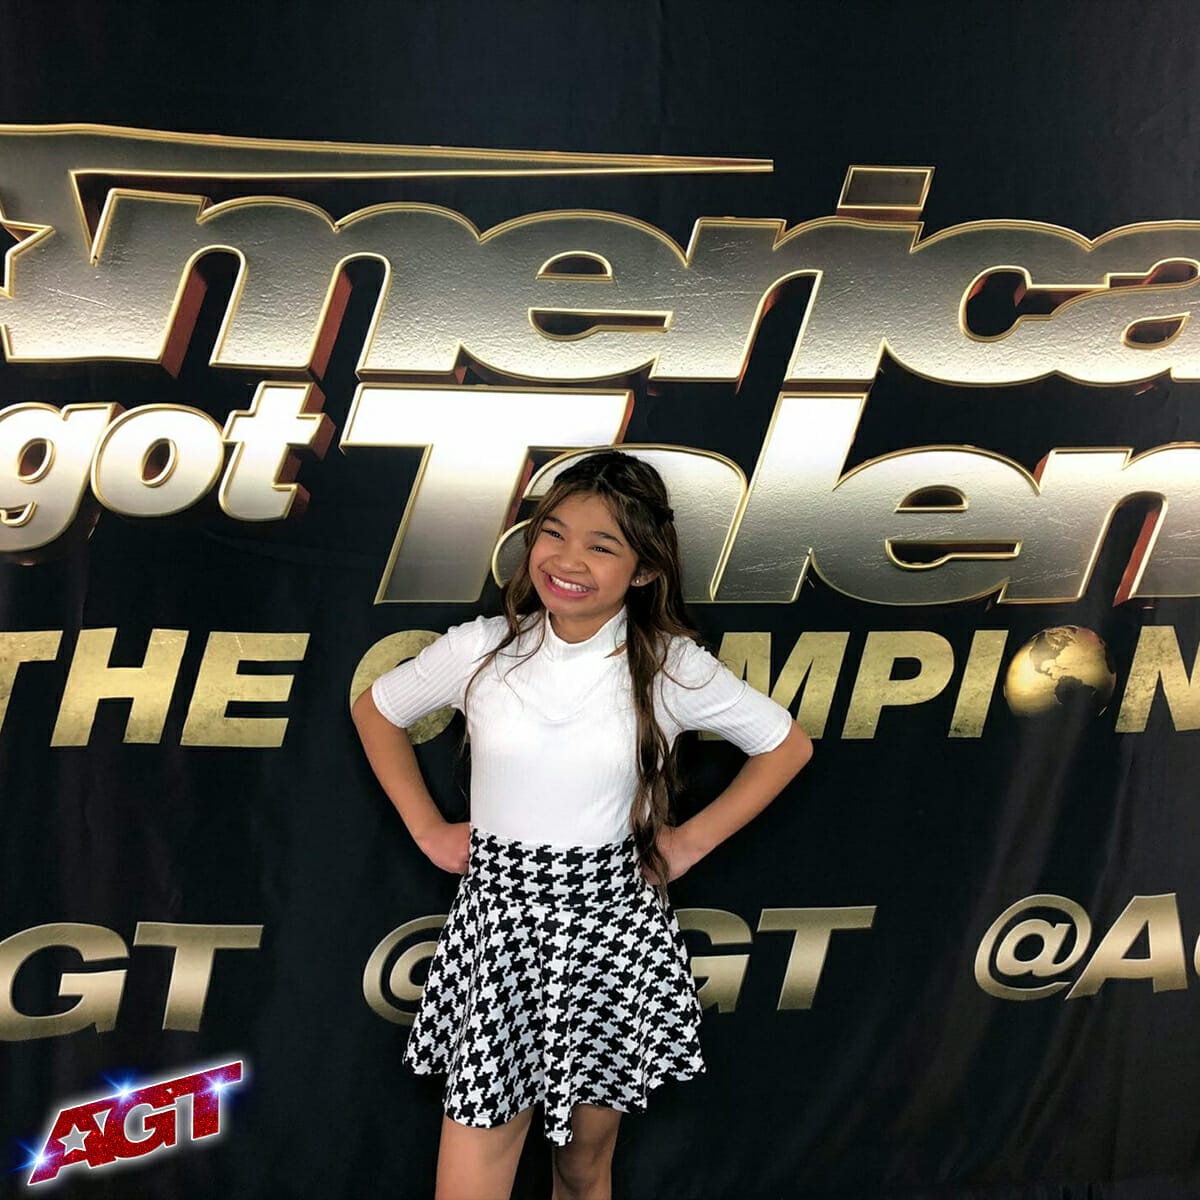 Angelica Hale on HiNOTE